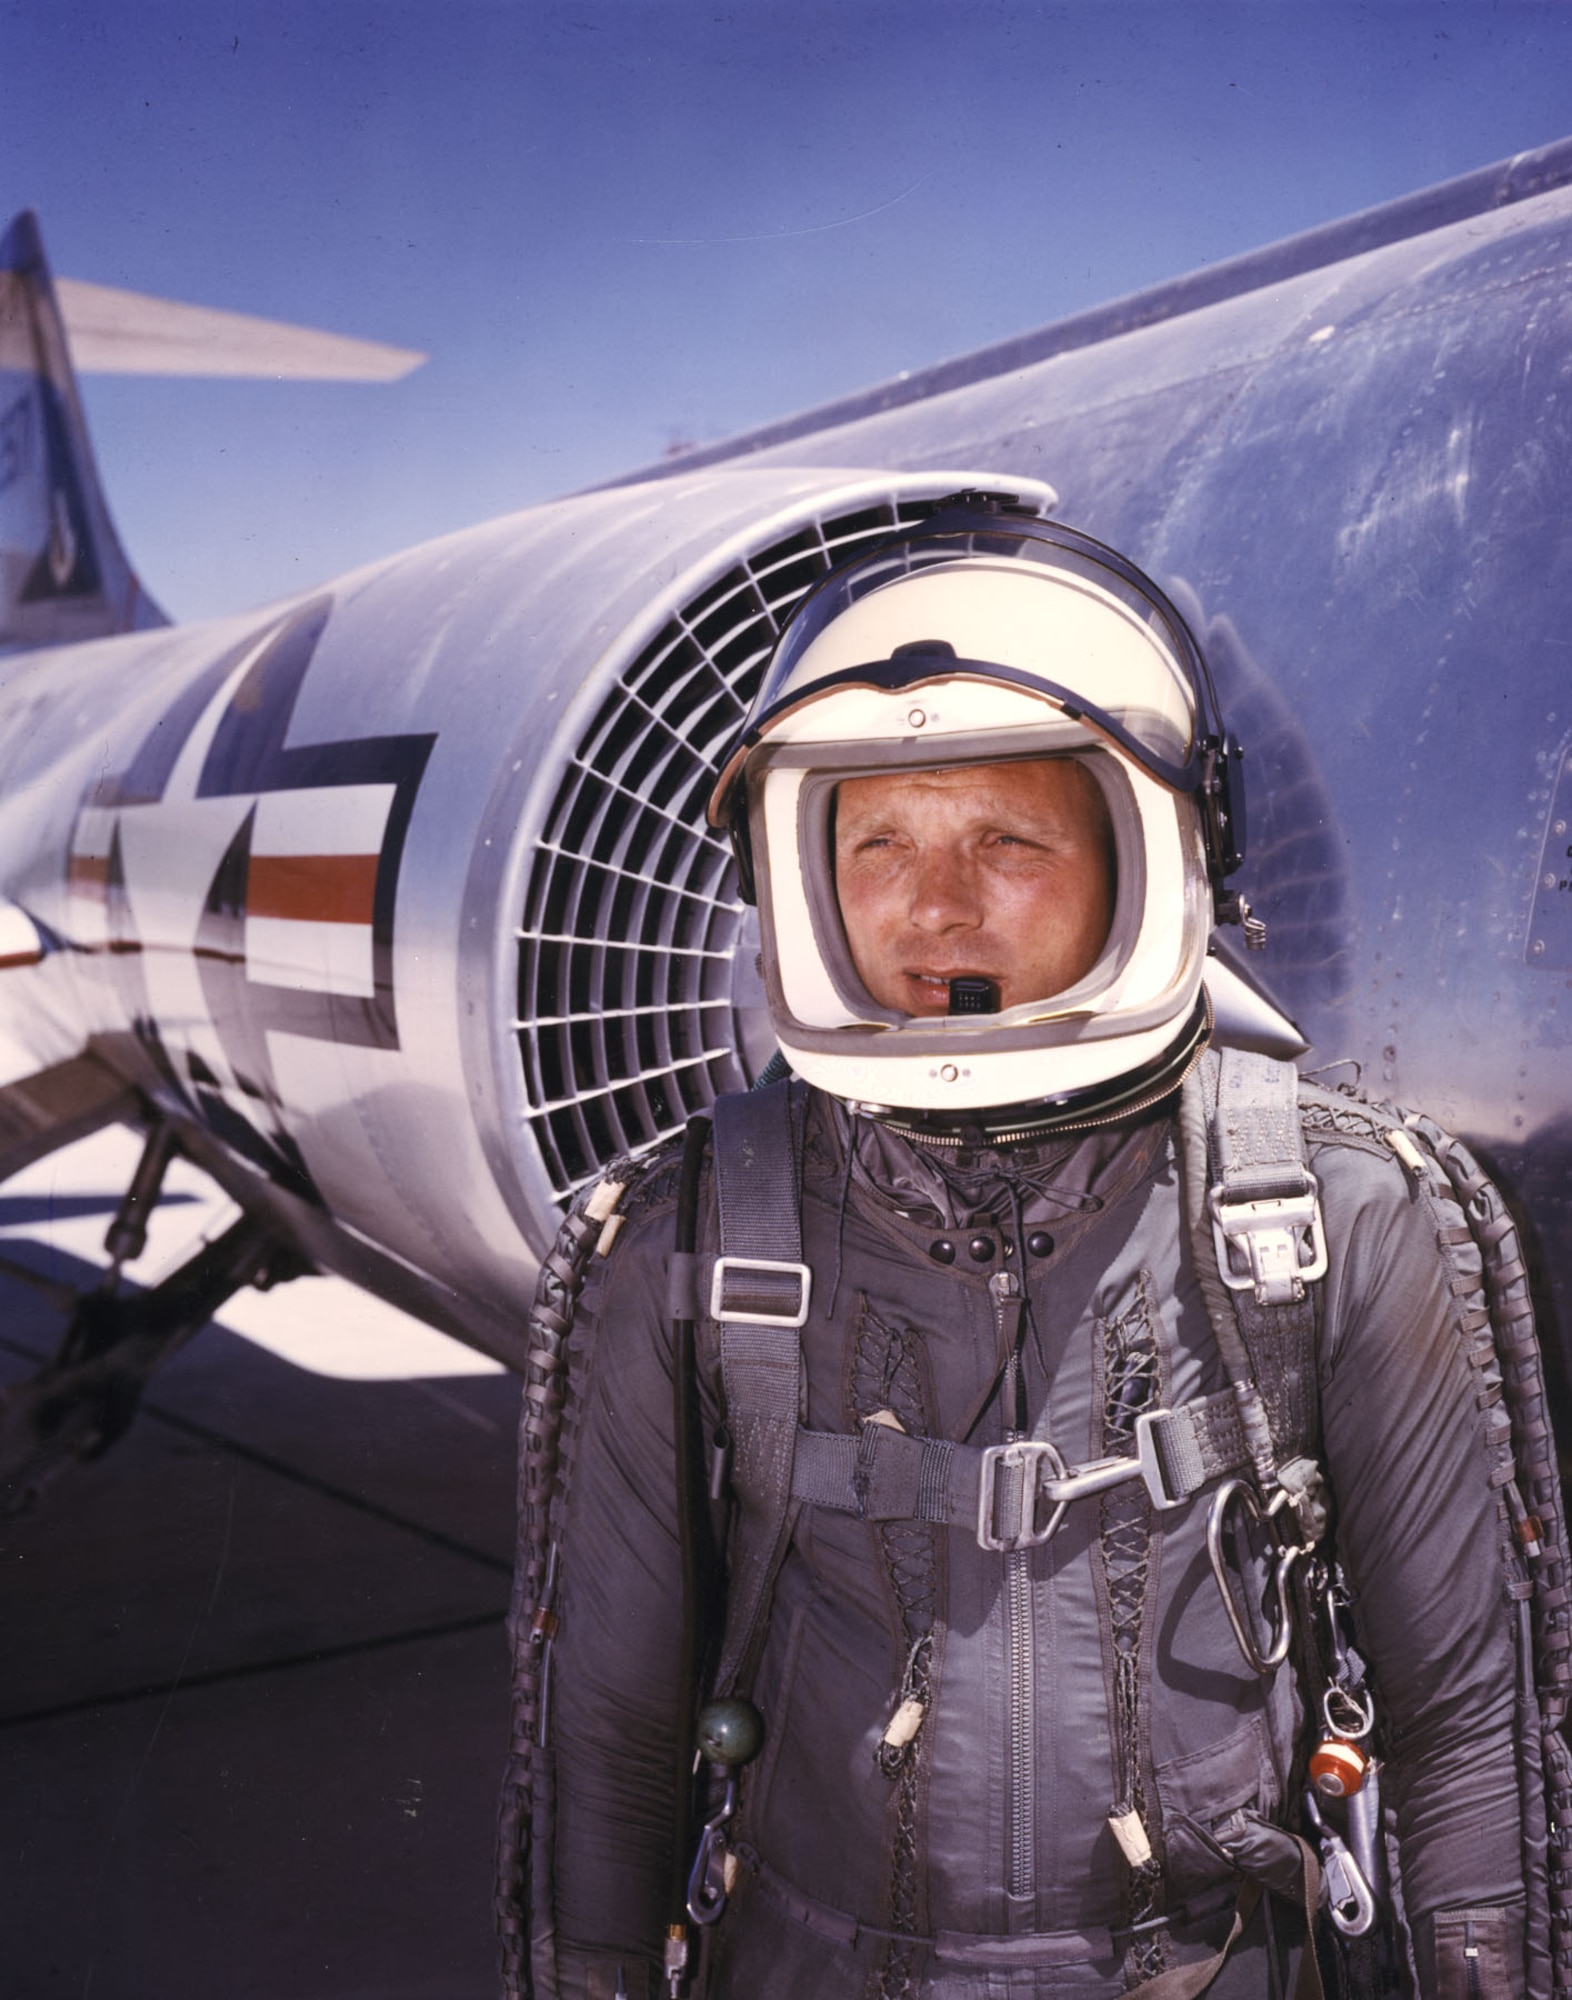 Wearing a high-altitude partial pressure suit, Capt. Iven C. Kincheloe Jr. poses beside an F-104, the type of plane he was flying when he was killed. (U.S. Air Force photo)